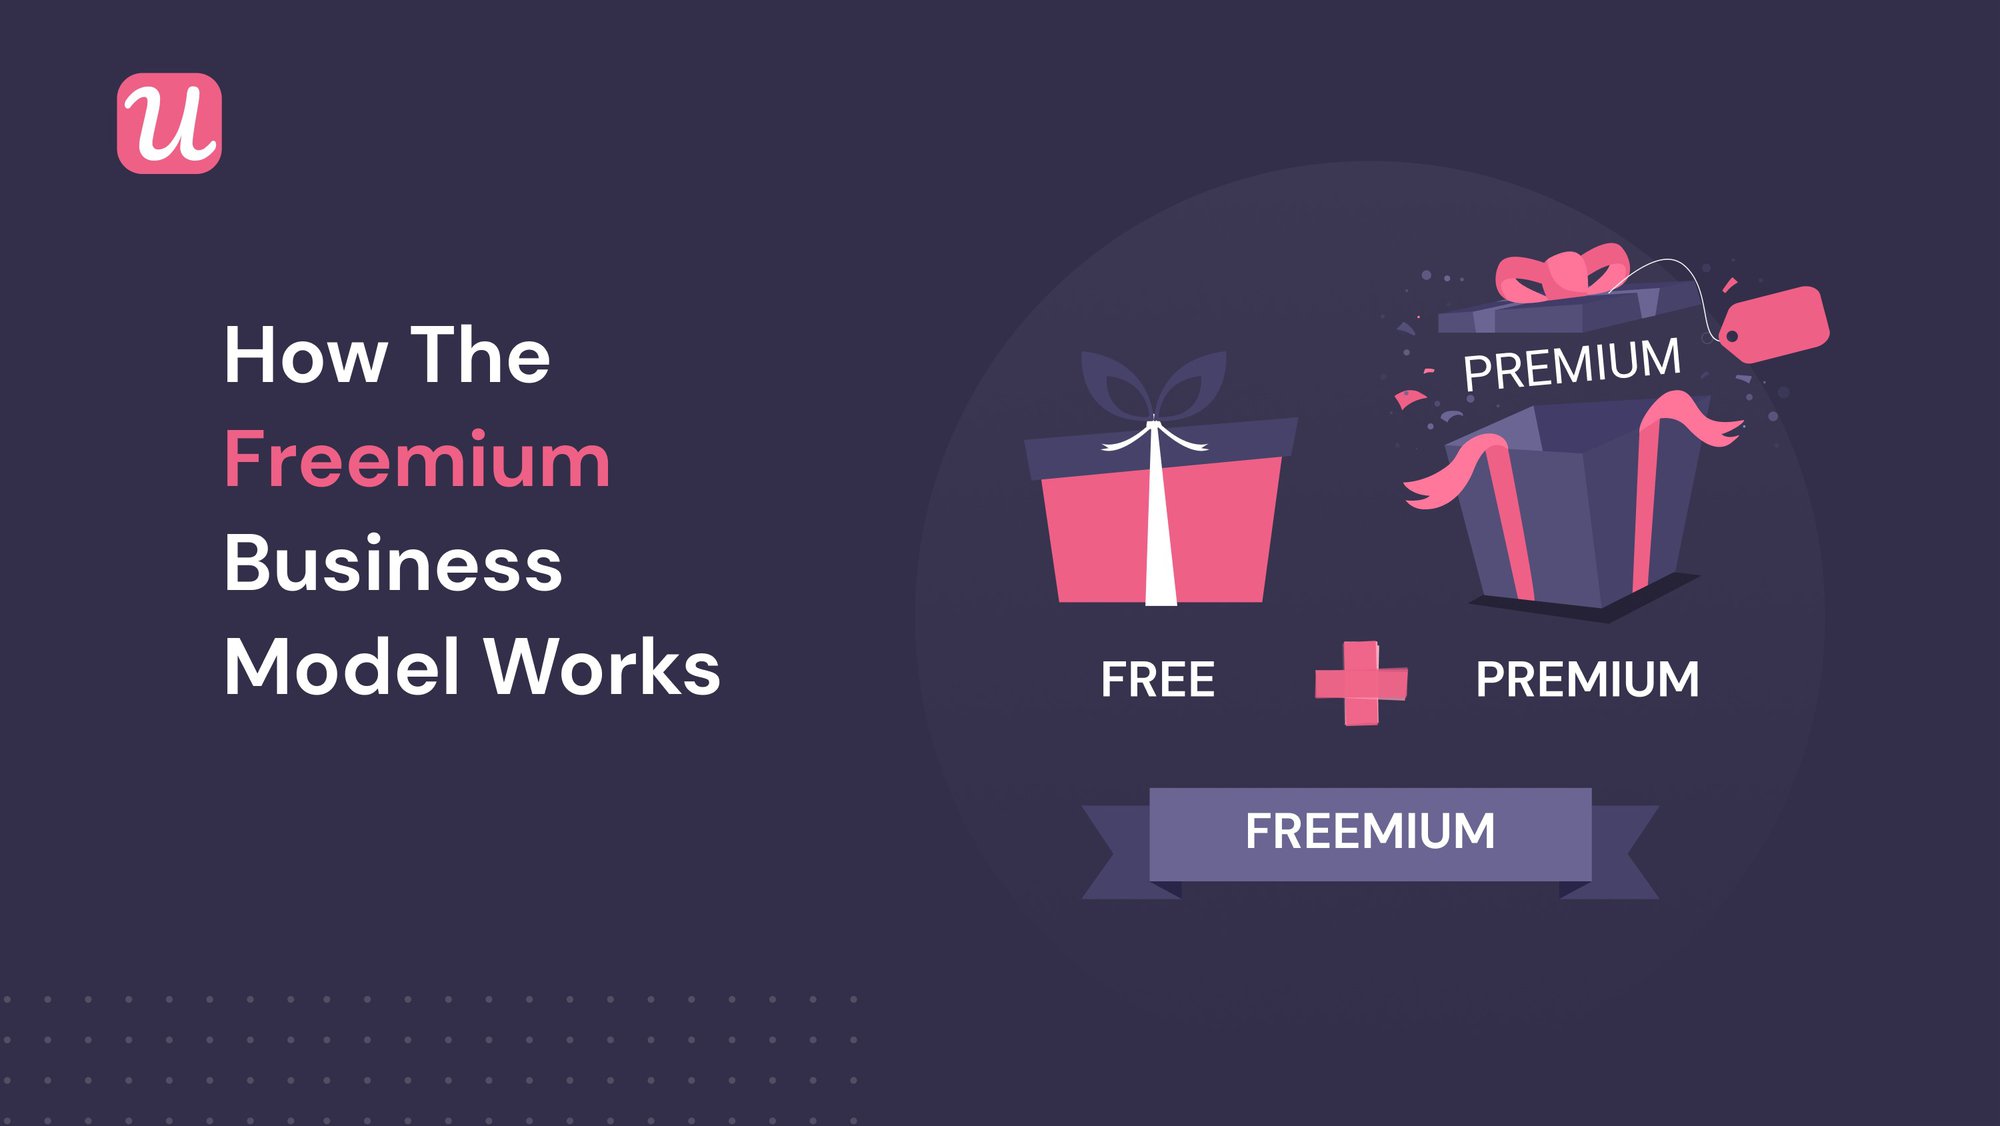 Is the Freemium Business Model Right for Your SaaS?